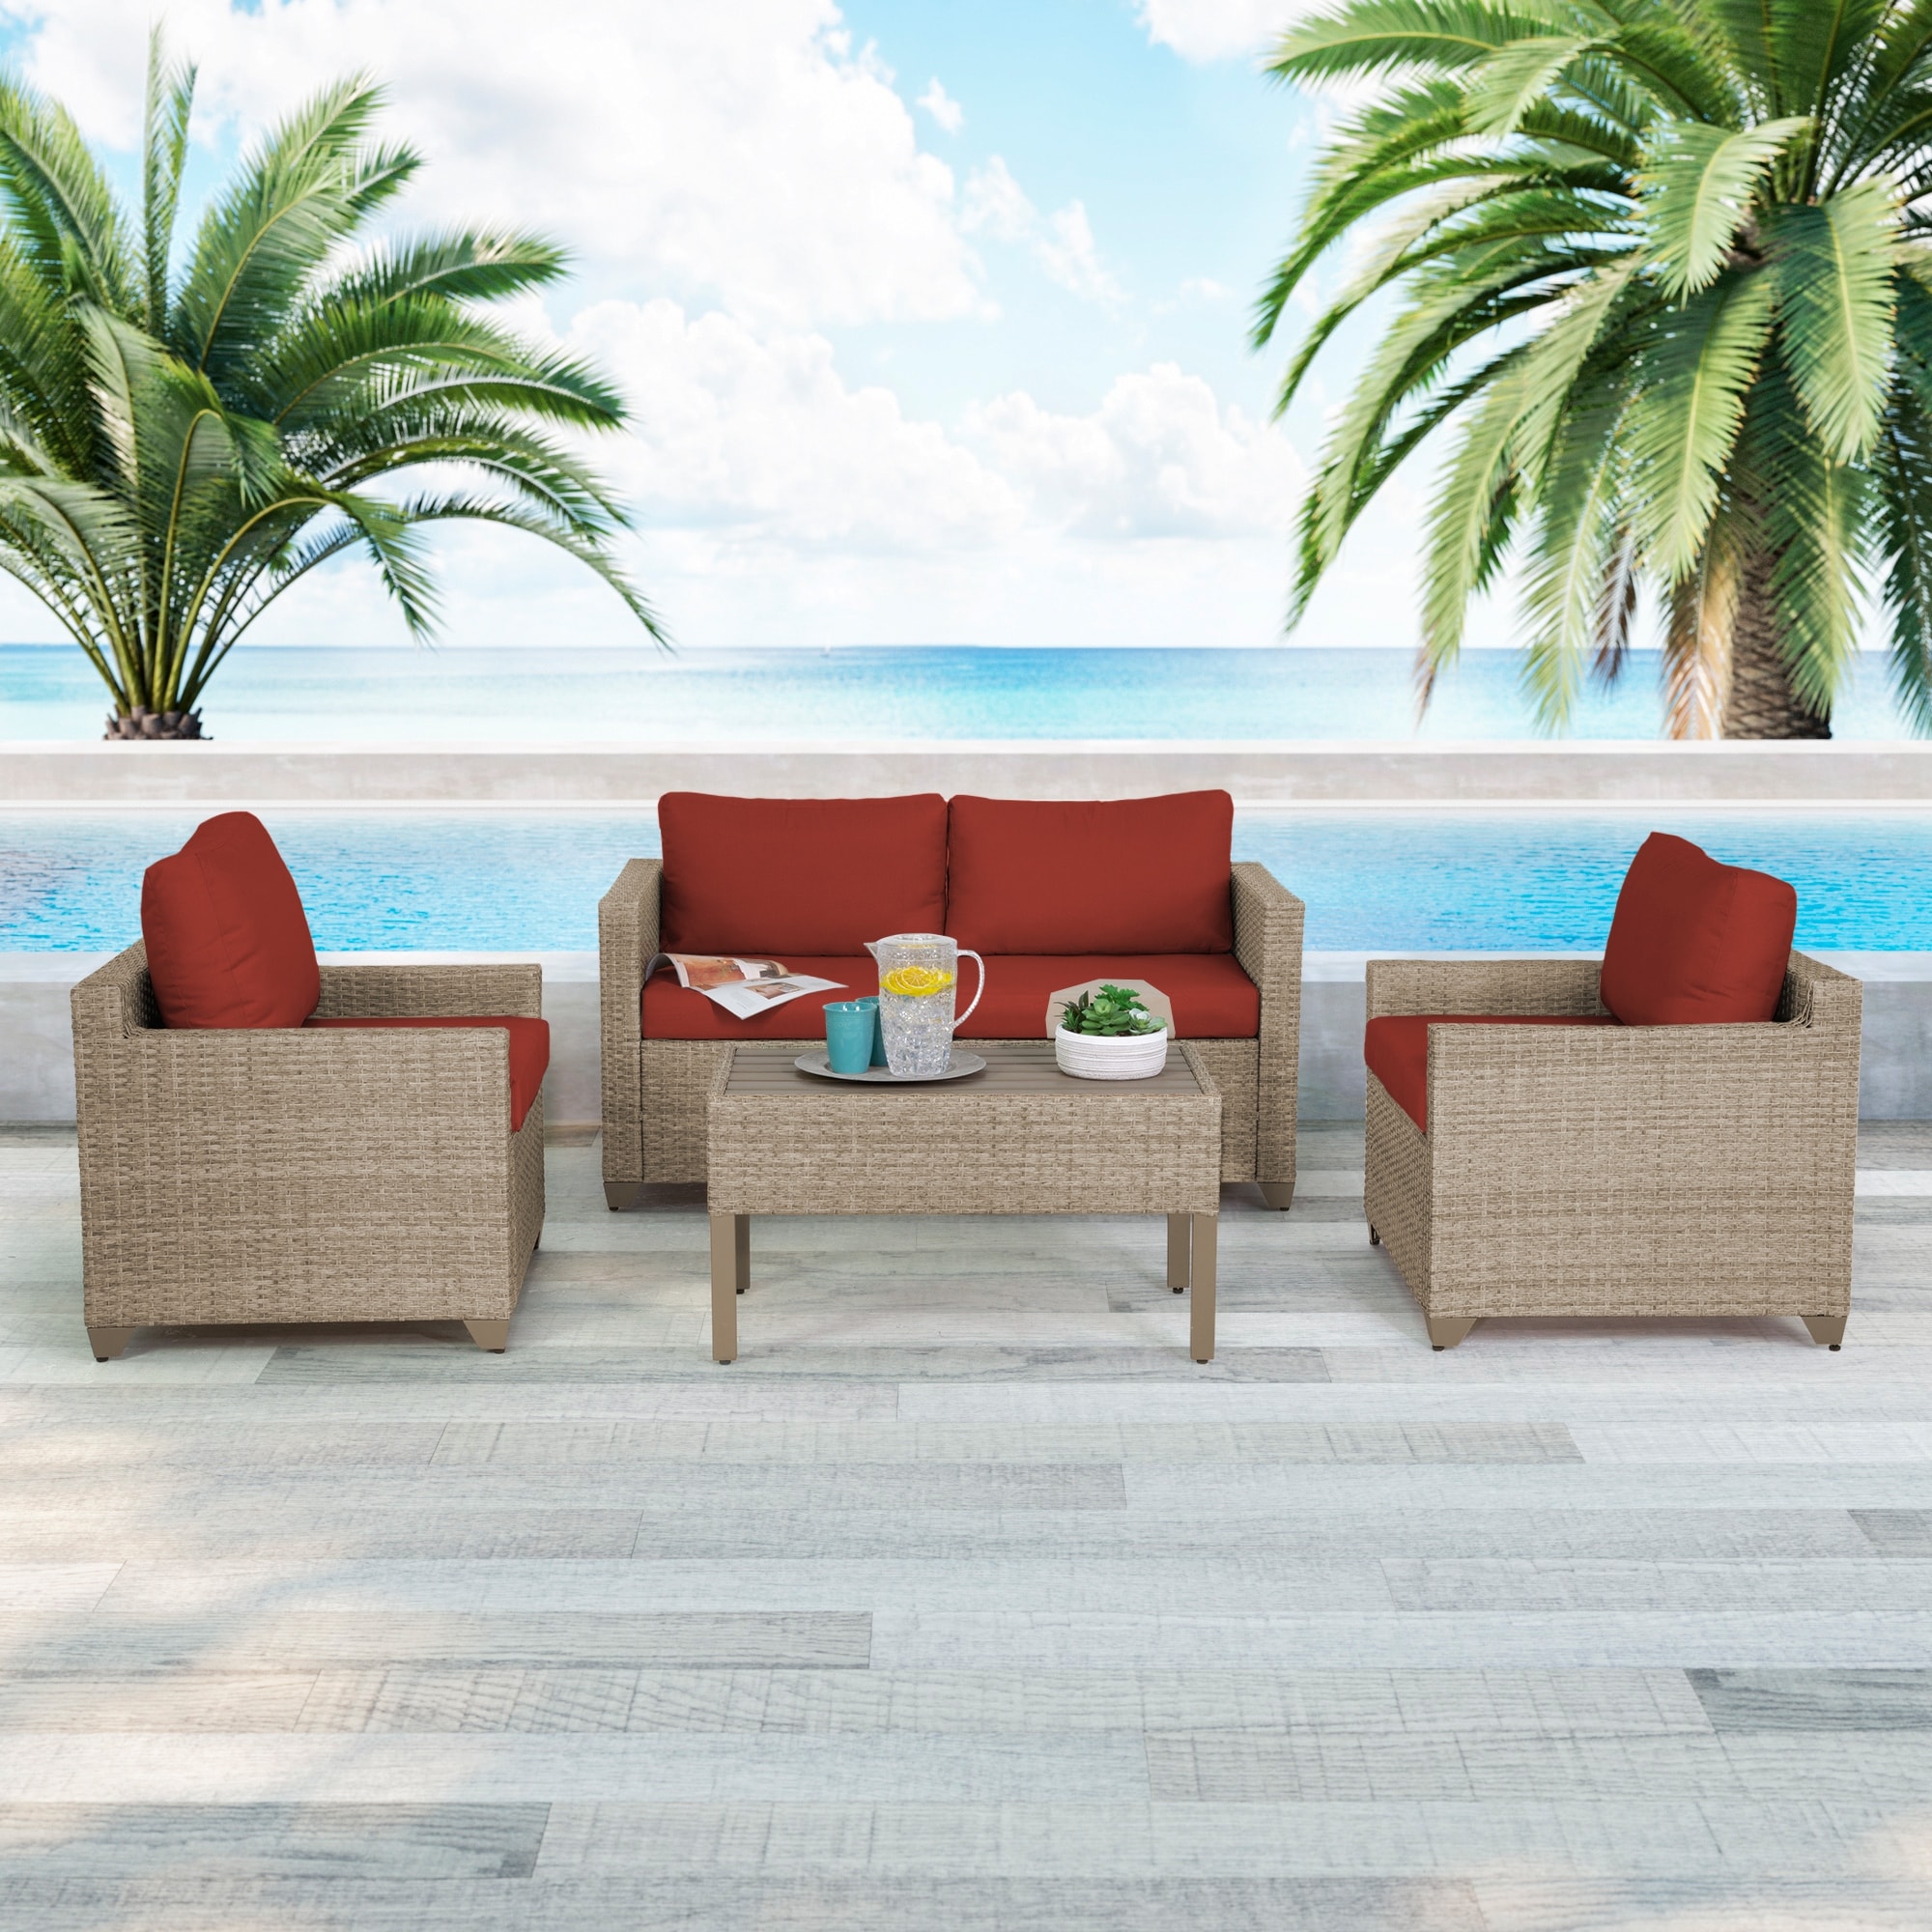 Maui 5-piece Outdoor Conversation Set Including Coffee Table And 2 Club Chairs In Natural Aged Wicker